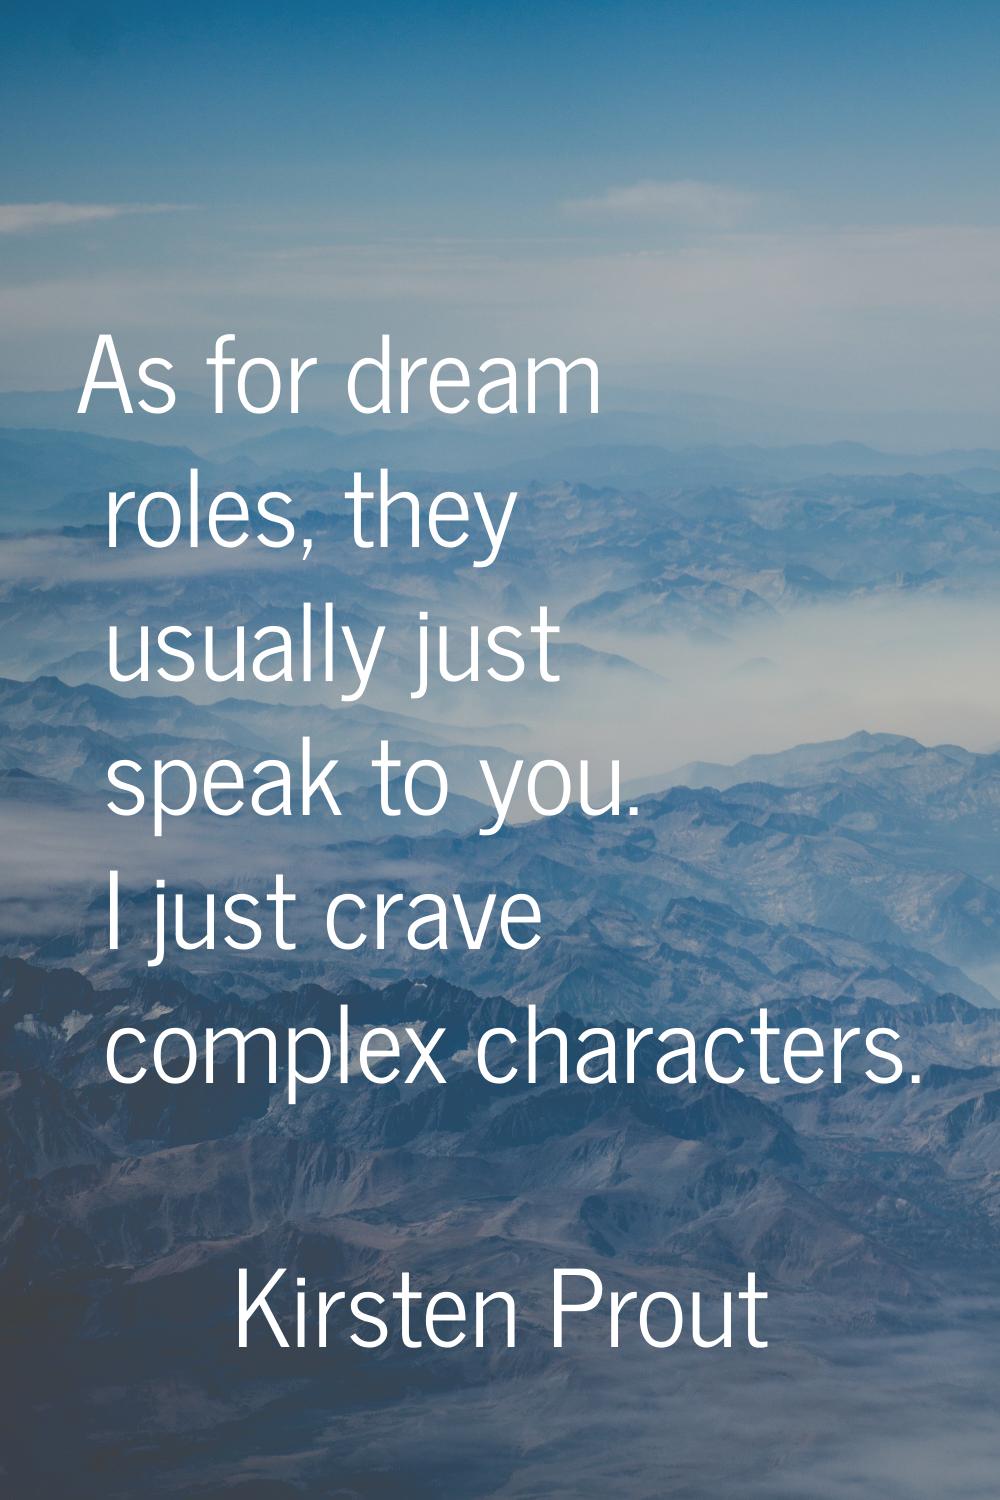 As for dream roles, they usually just speak to you. I just crave complex characters.